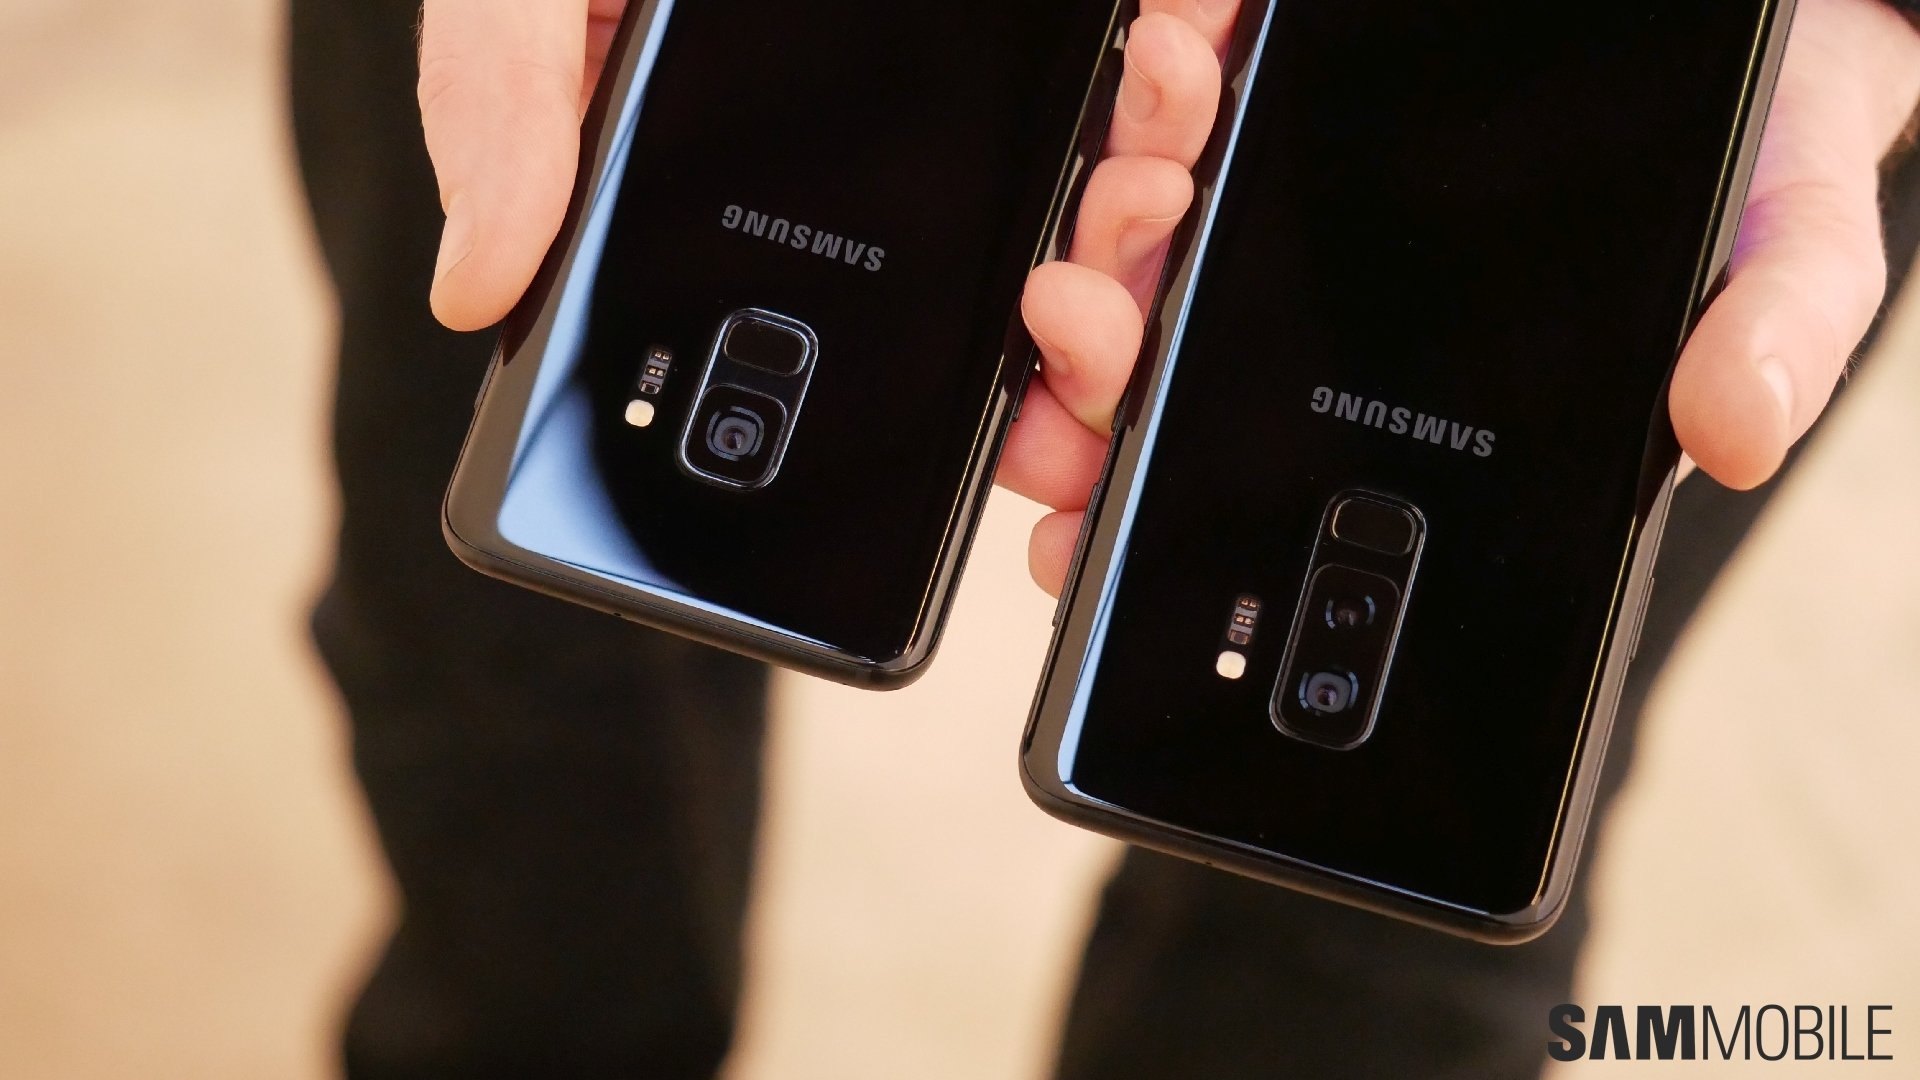 Here is the official spec sheet for the Galaxy S9 and Galaxy S9+